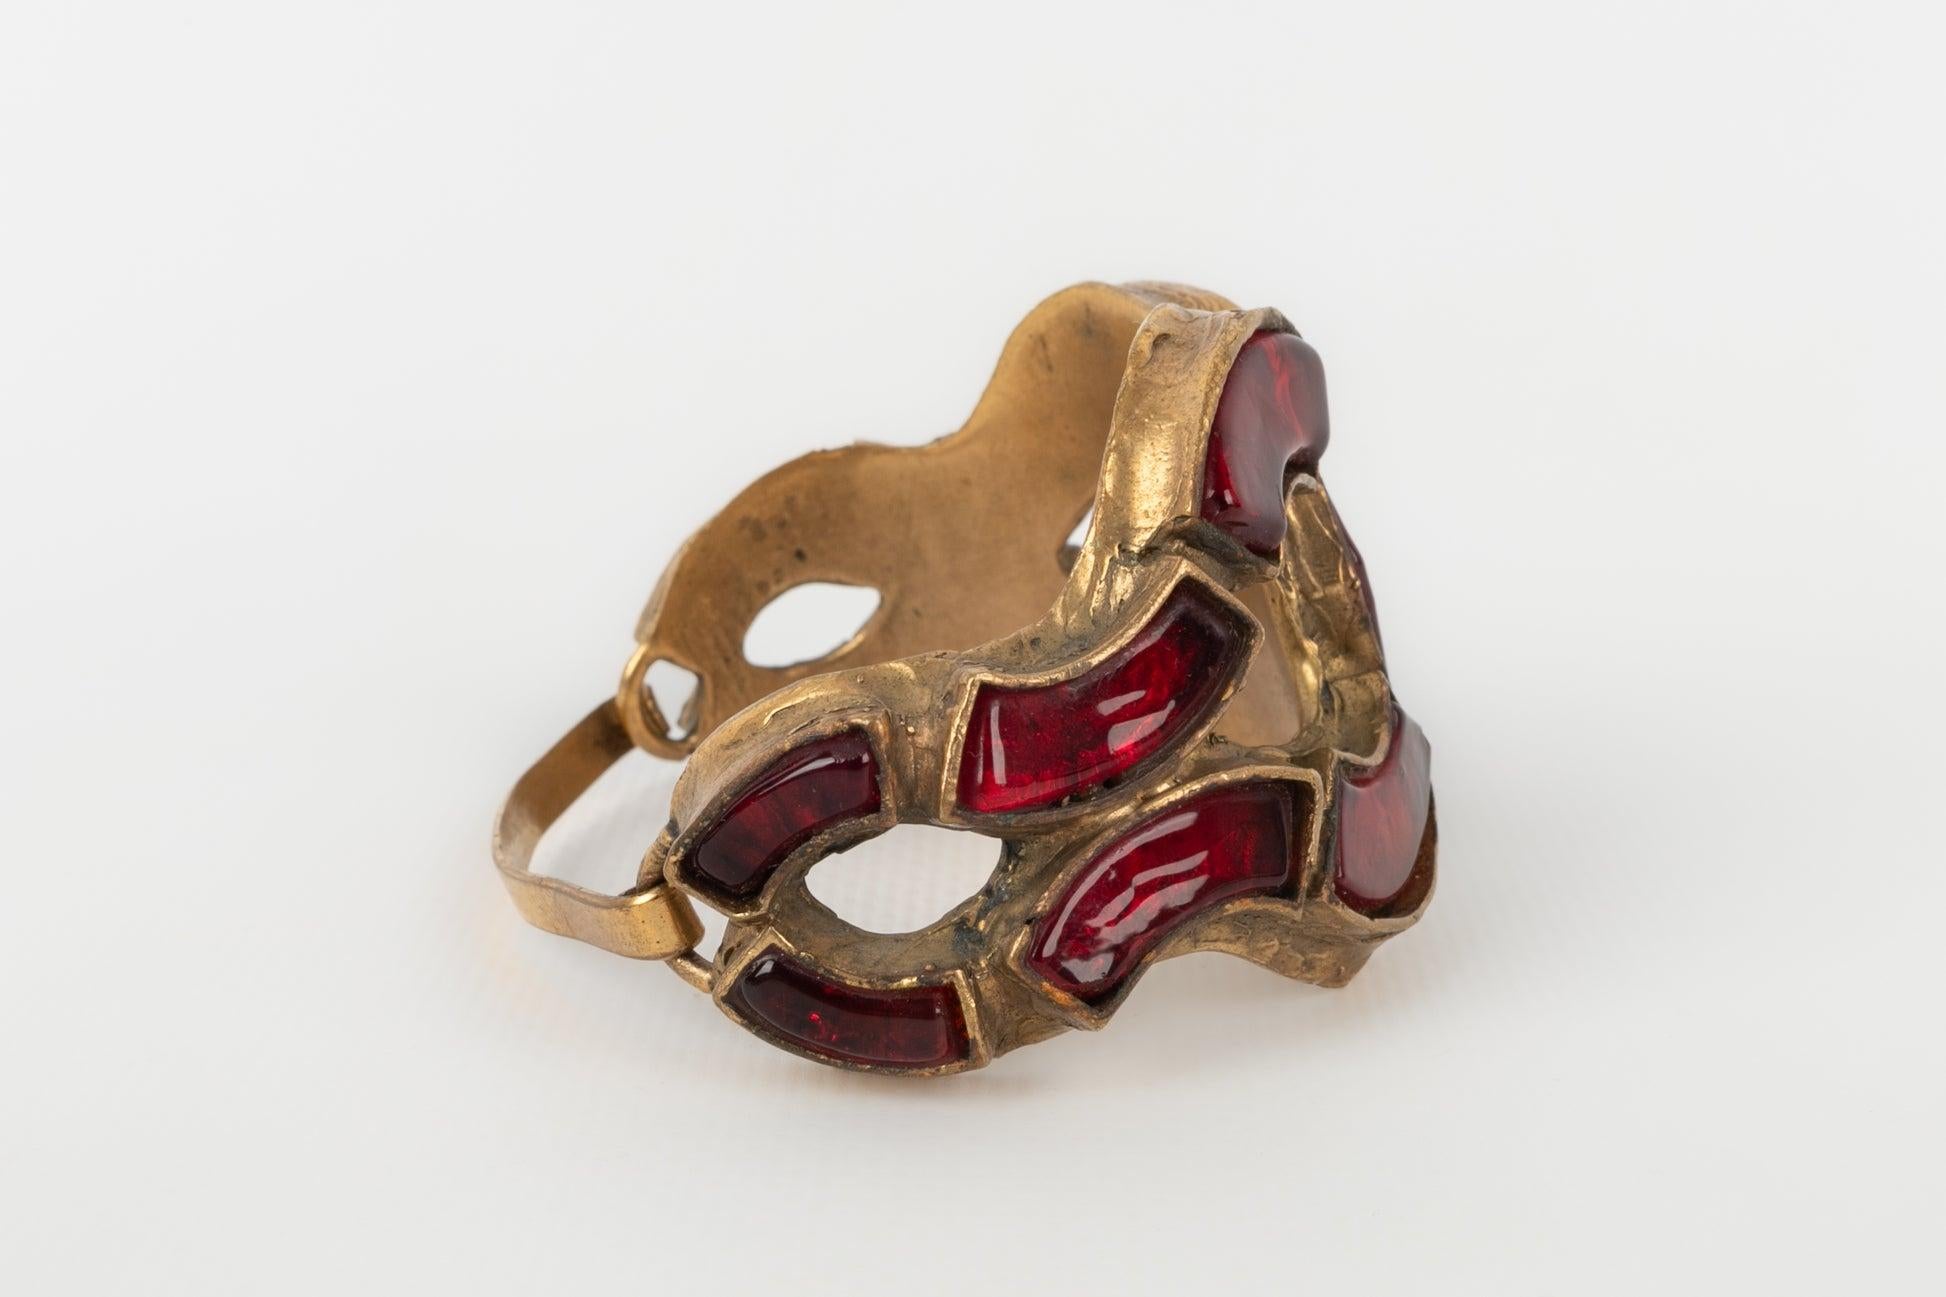 Chanel - Golden metal bracelet with red glass paste. Jewelry from the Goosens ateliers designed for Gabrielle Chanel.

Additional information:
Condition: Very good condition
Dimensions: Length: 16.5 cm
Opening: 4.3 cm

Seller reference: BRAB95